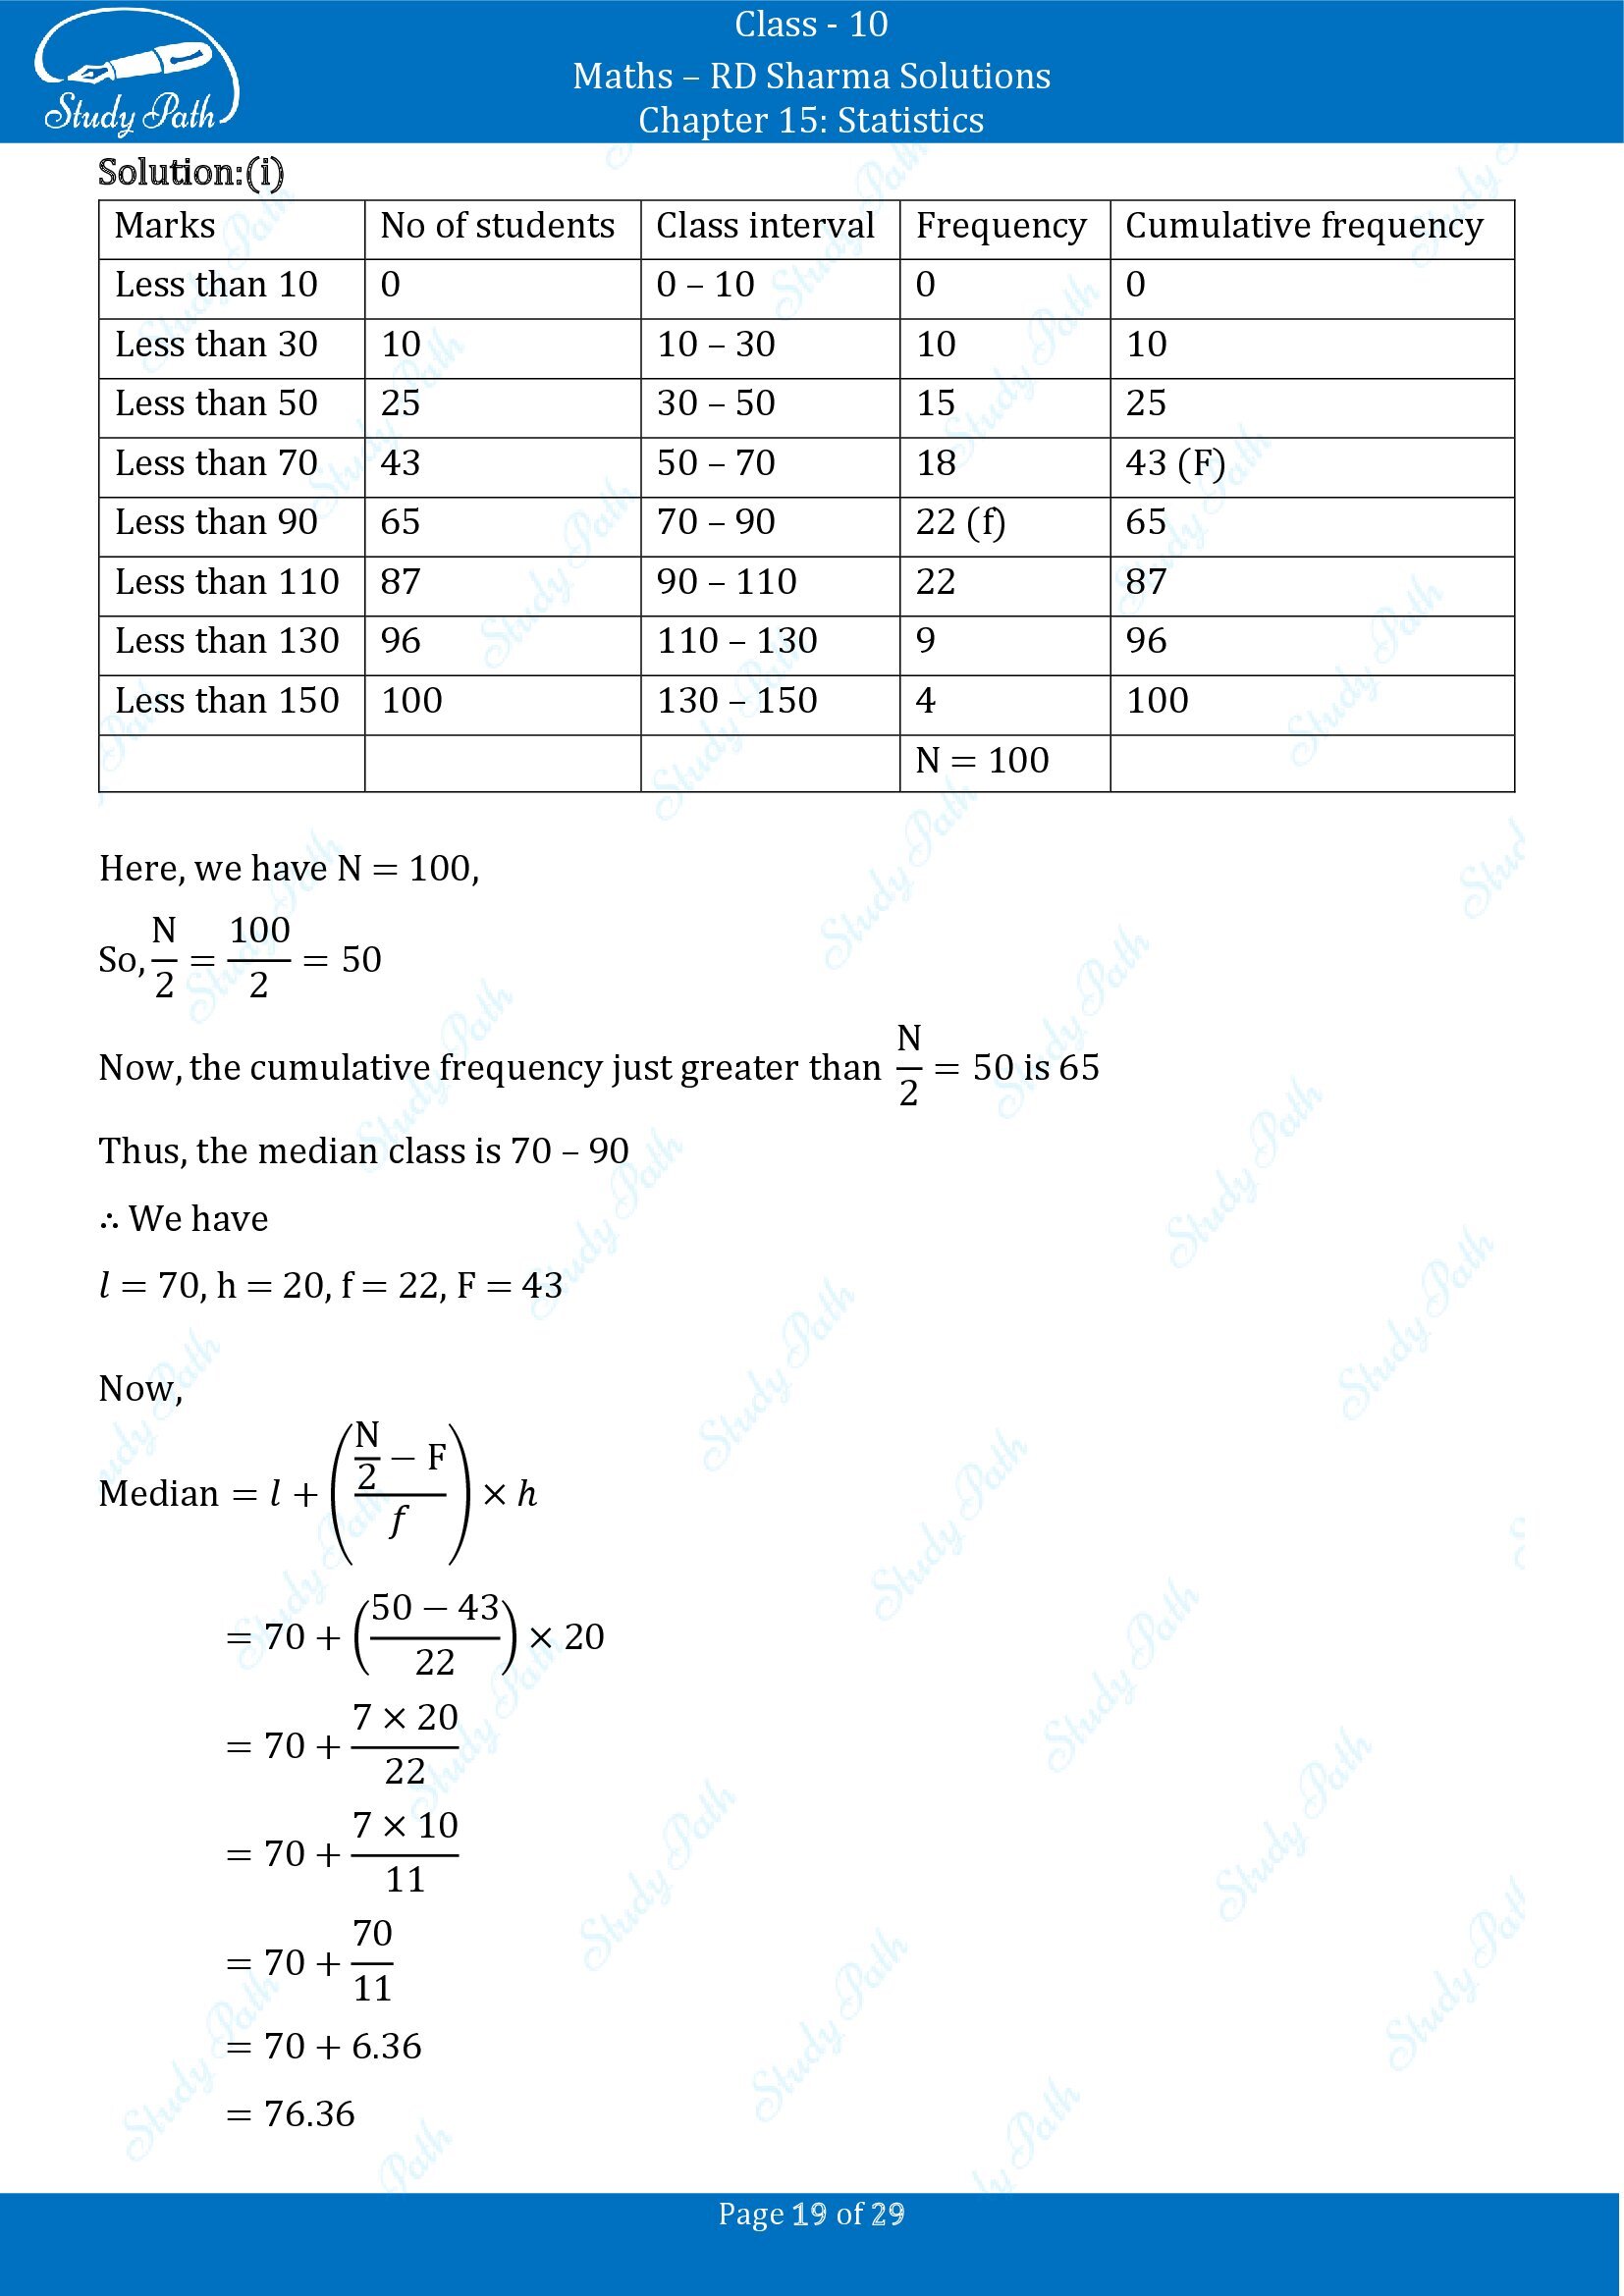 RD Sharma Solutions Class 10 Chapter 15 Statistics Exercise 15.4 00019